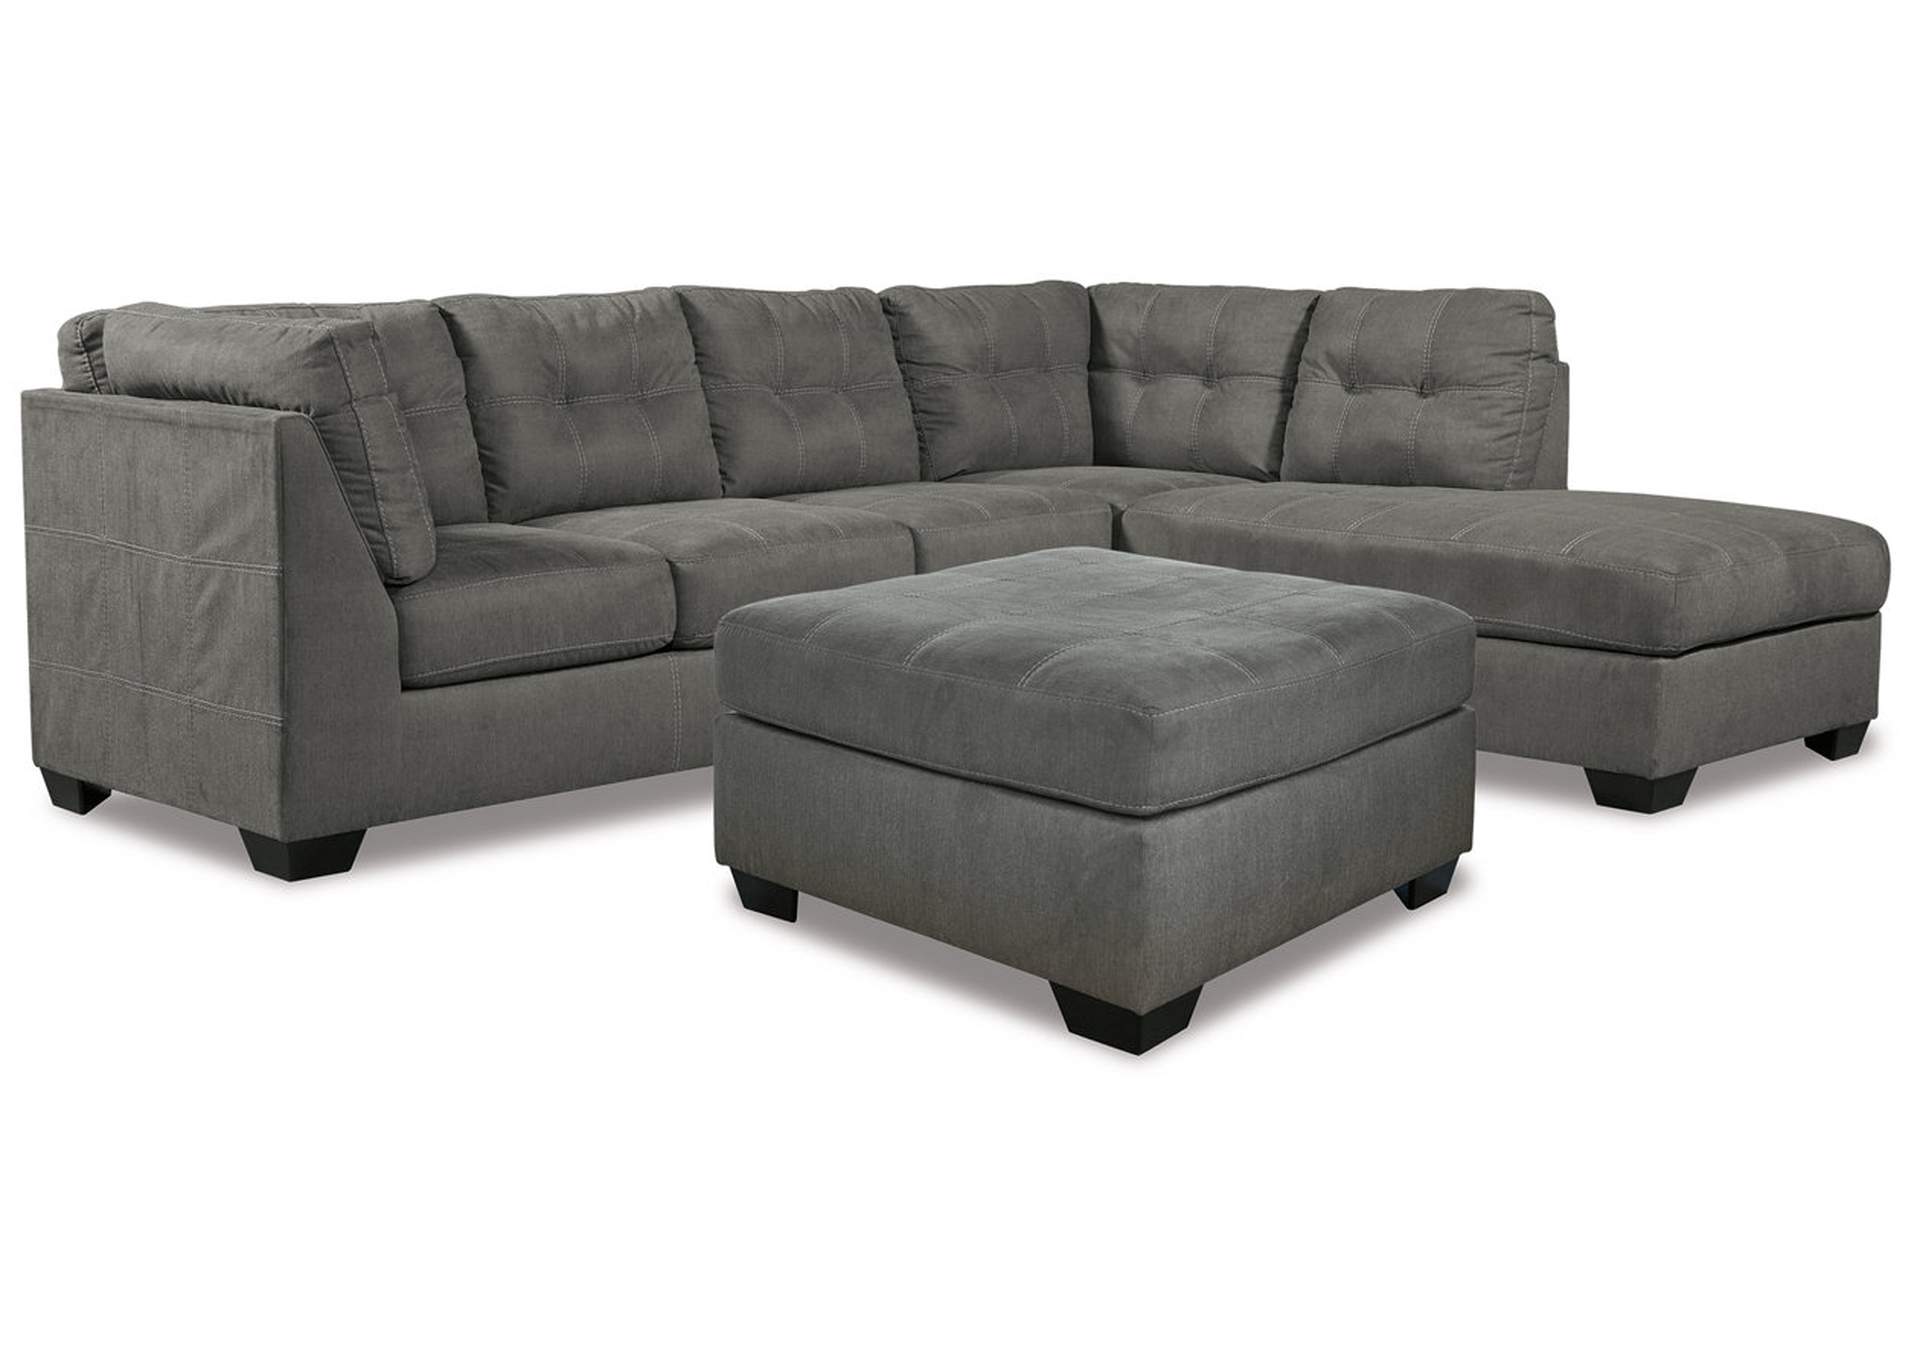 Pitkin 2 Piece Sectional With Ottoman